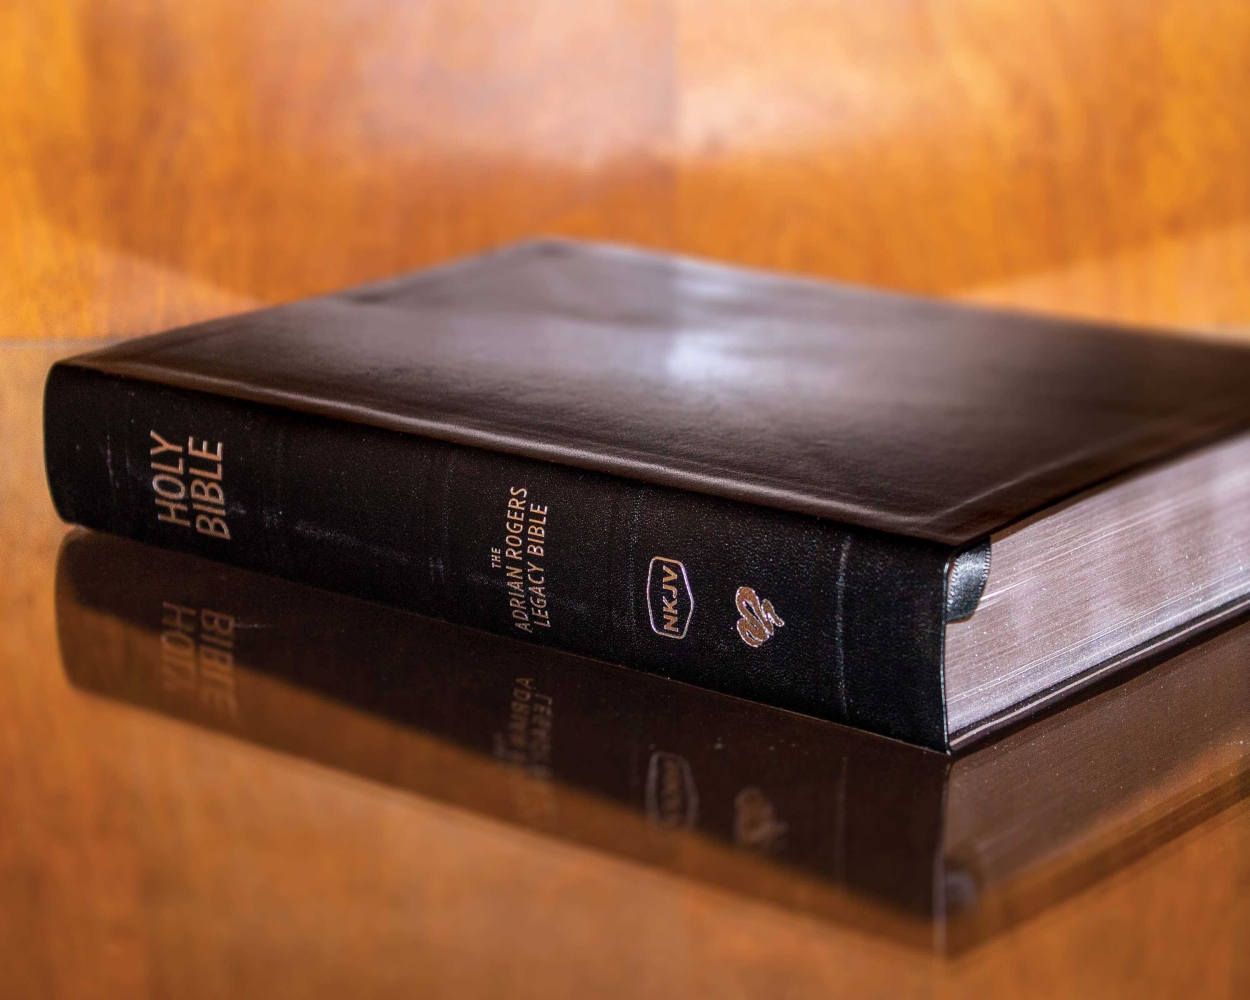 Legacy bible with reflection and blur